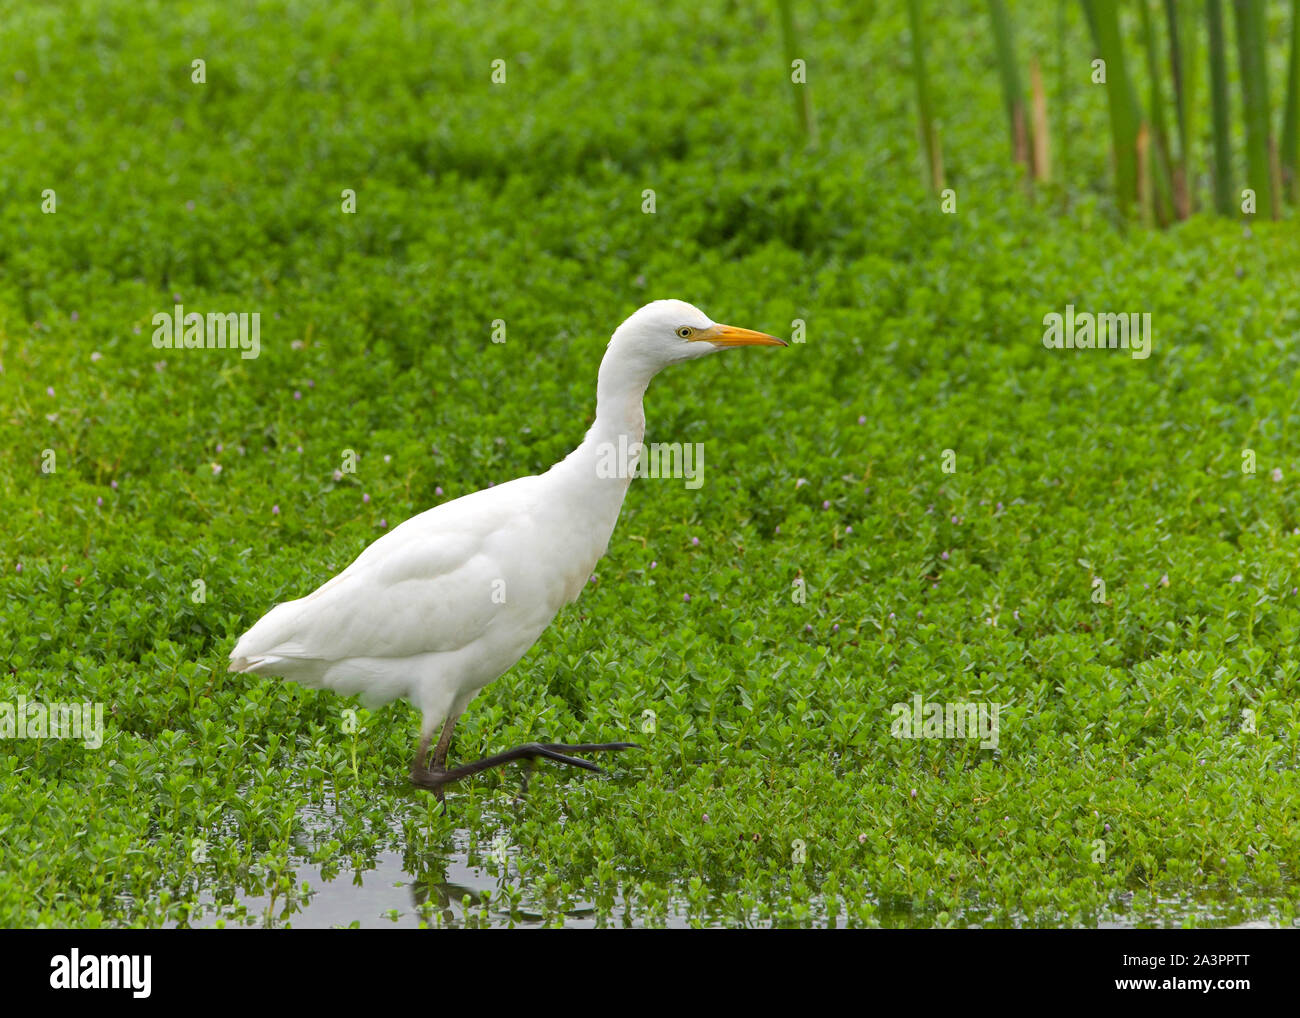 one Cattle Egret foraging for food in shallow marsh waters. The cattle egret nests in colonies, which are often found around bodies of water. Stock Photo